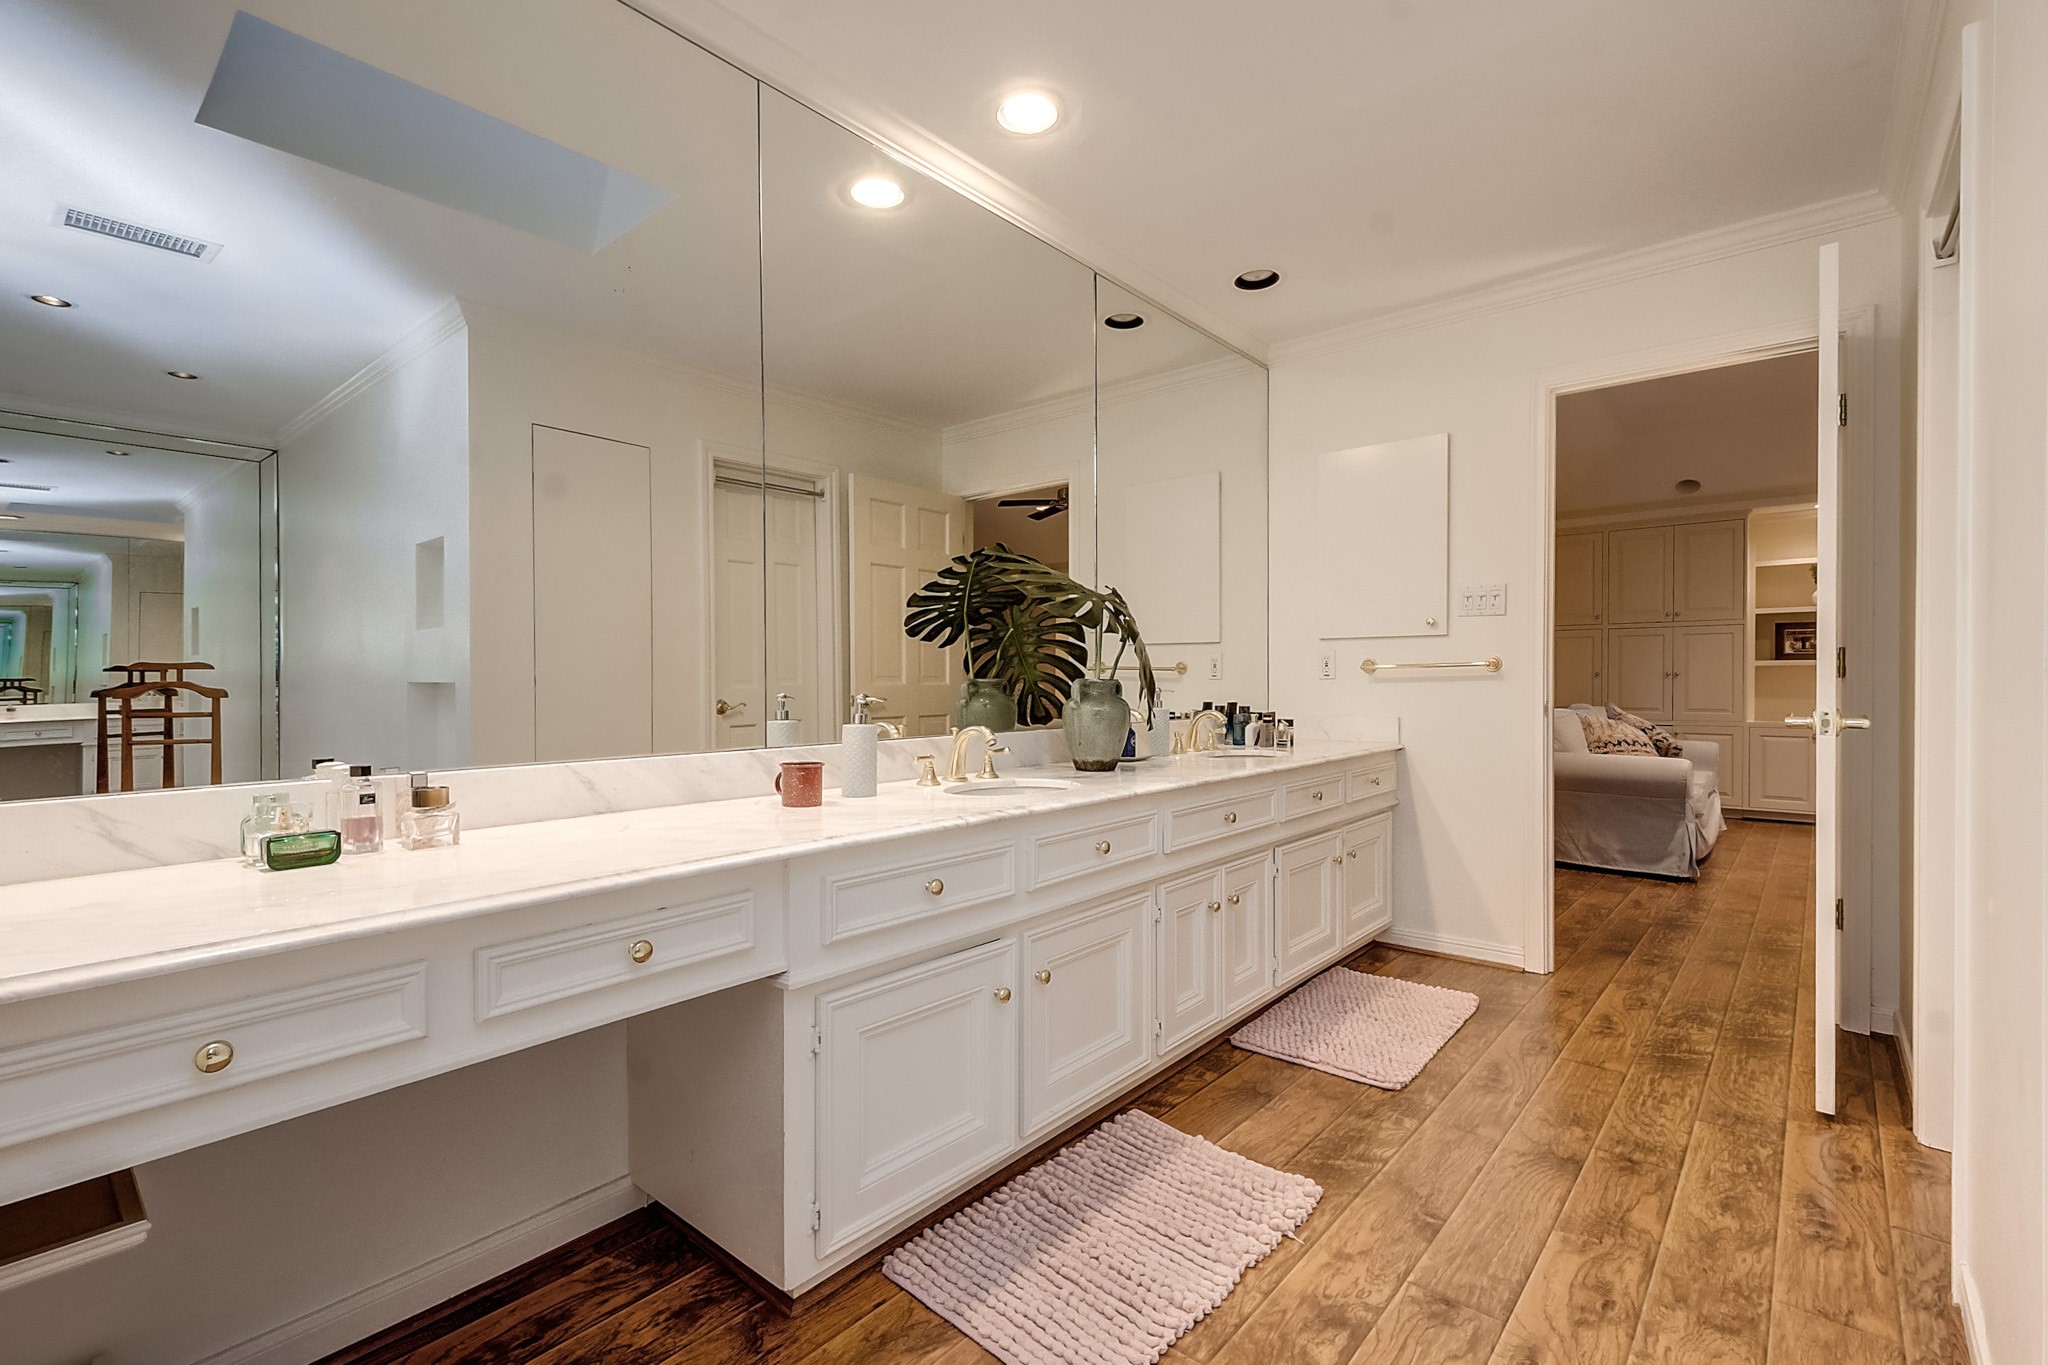 Master Bath has LONG marble counter top with two sinks, two walk-in closets and room for an exercise nook.